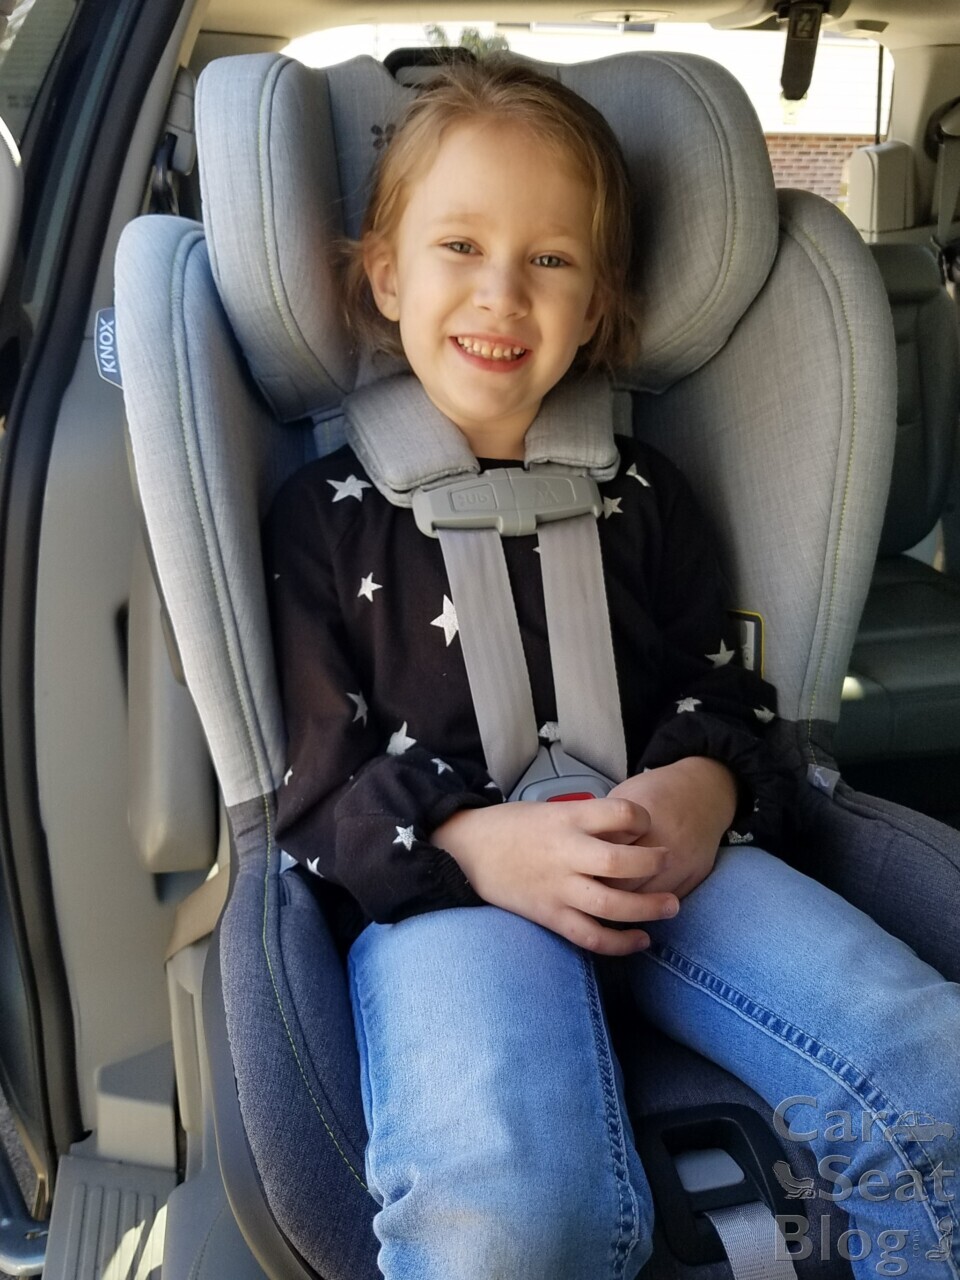 https://carseatblog.com/wp-content/uploads/2021/03/UPPAbaby-KNOX-FF-6-year-old.jpg